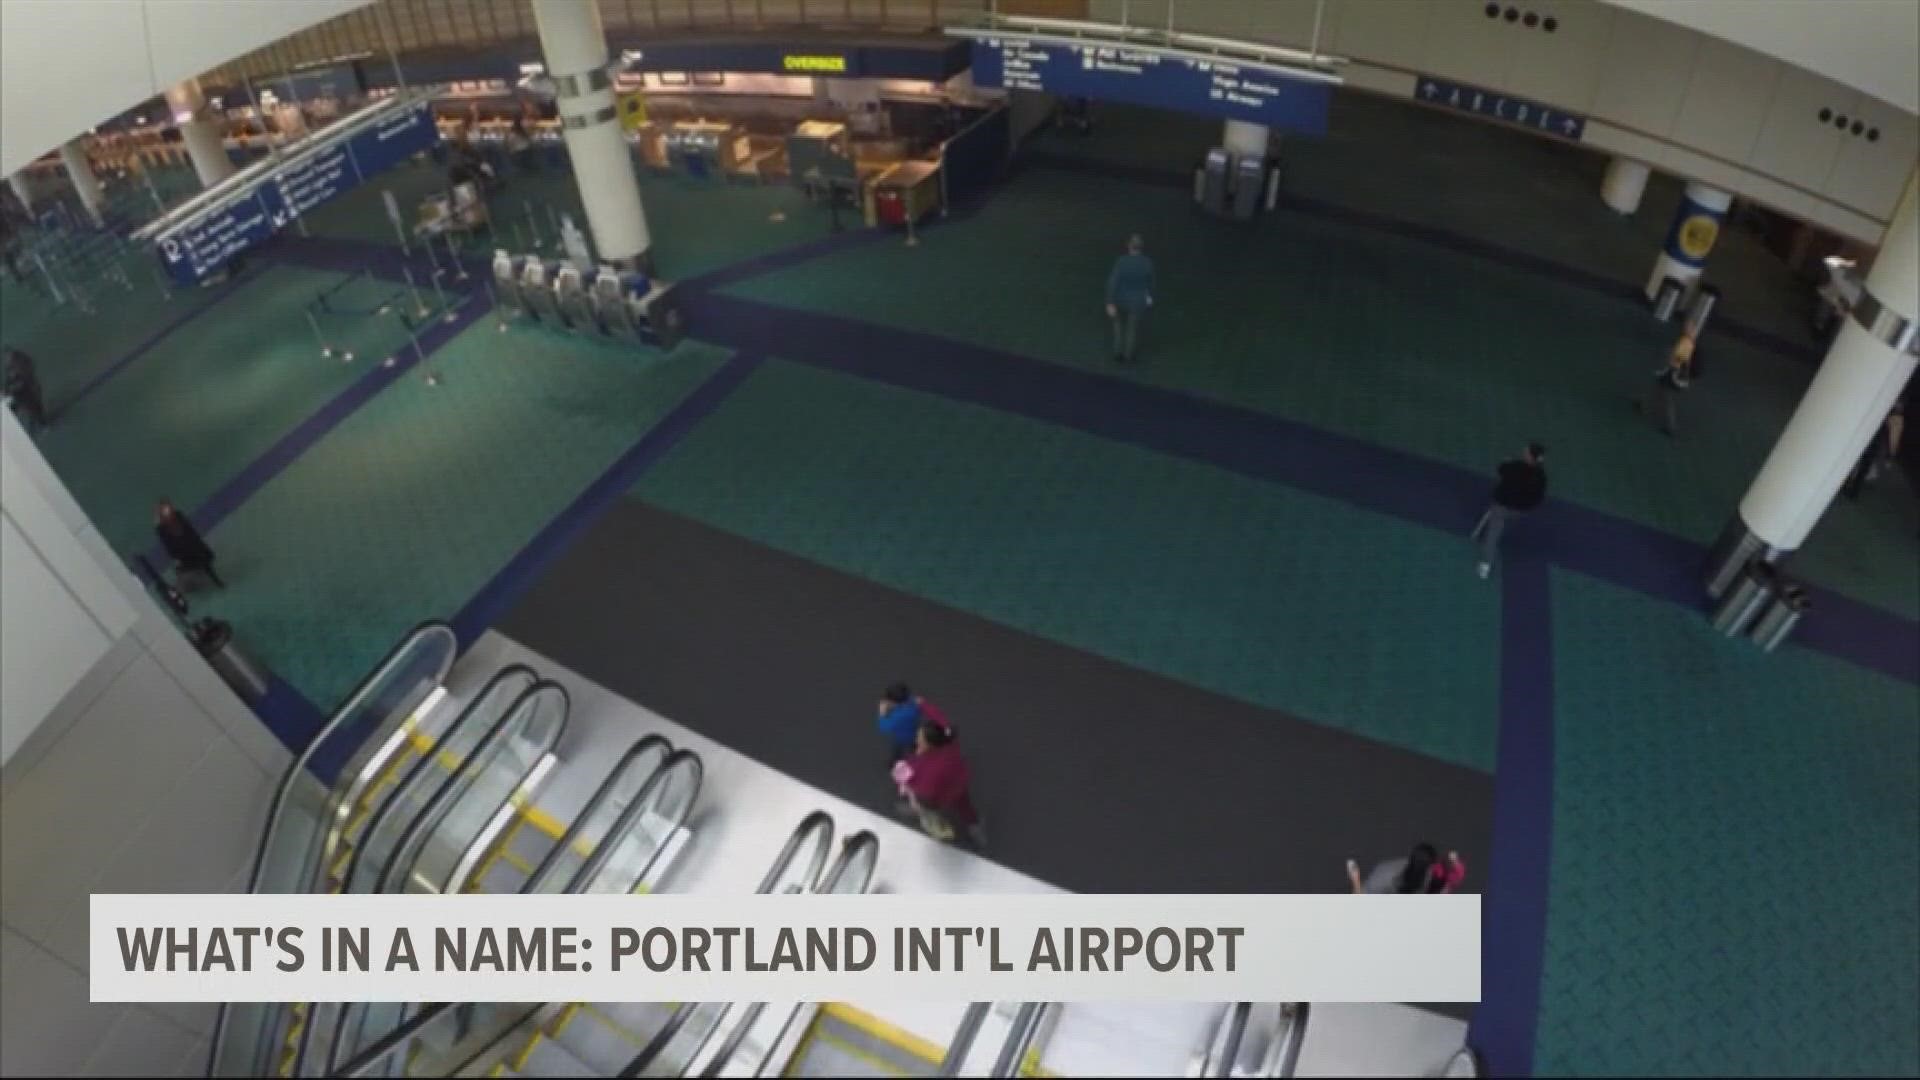 Portland International Airport is commonly known as 'PDX,' but where does the 'X' come from? KGW Sunrise's Devon Haskins found out.